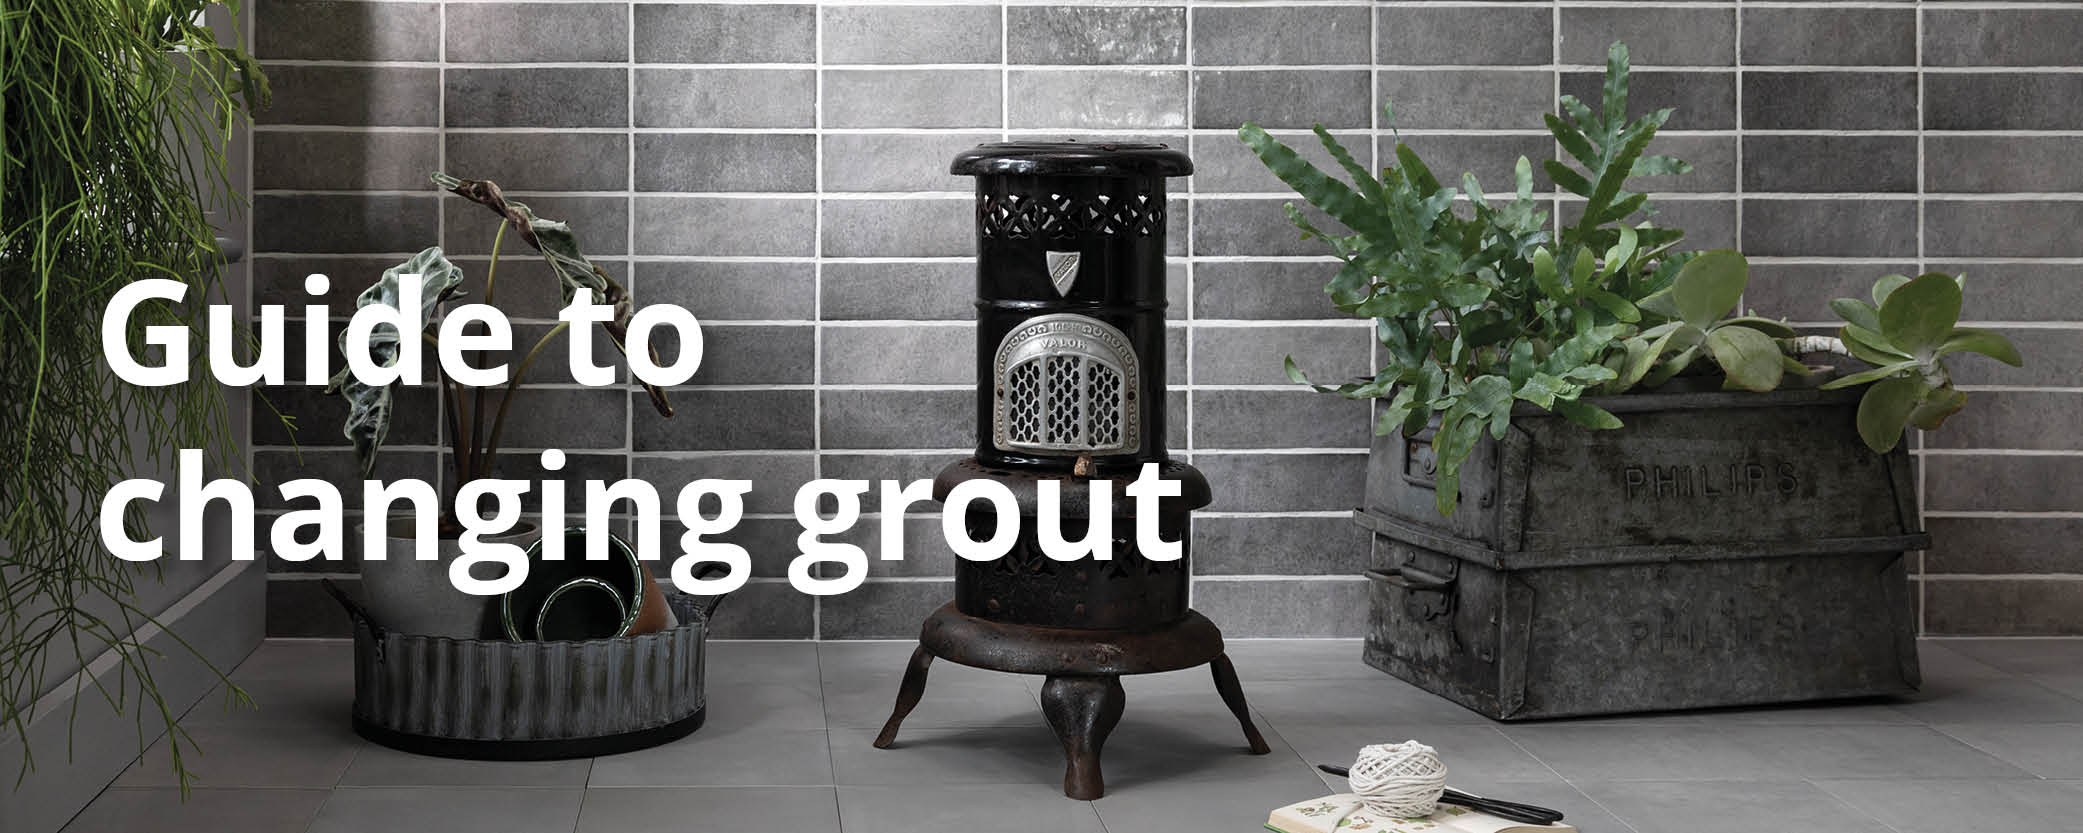 header: Guide to changing grout